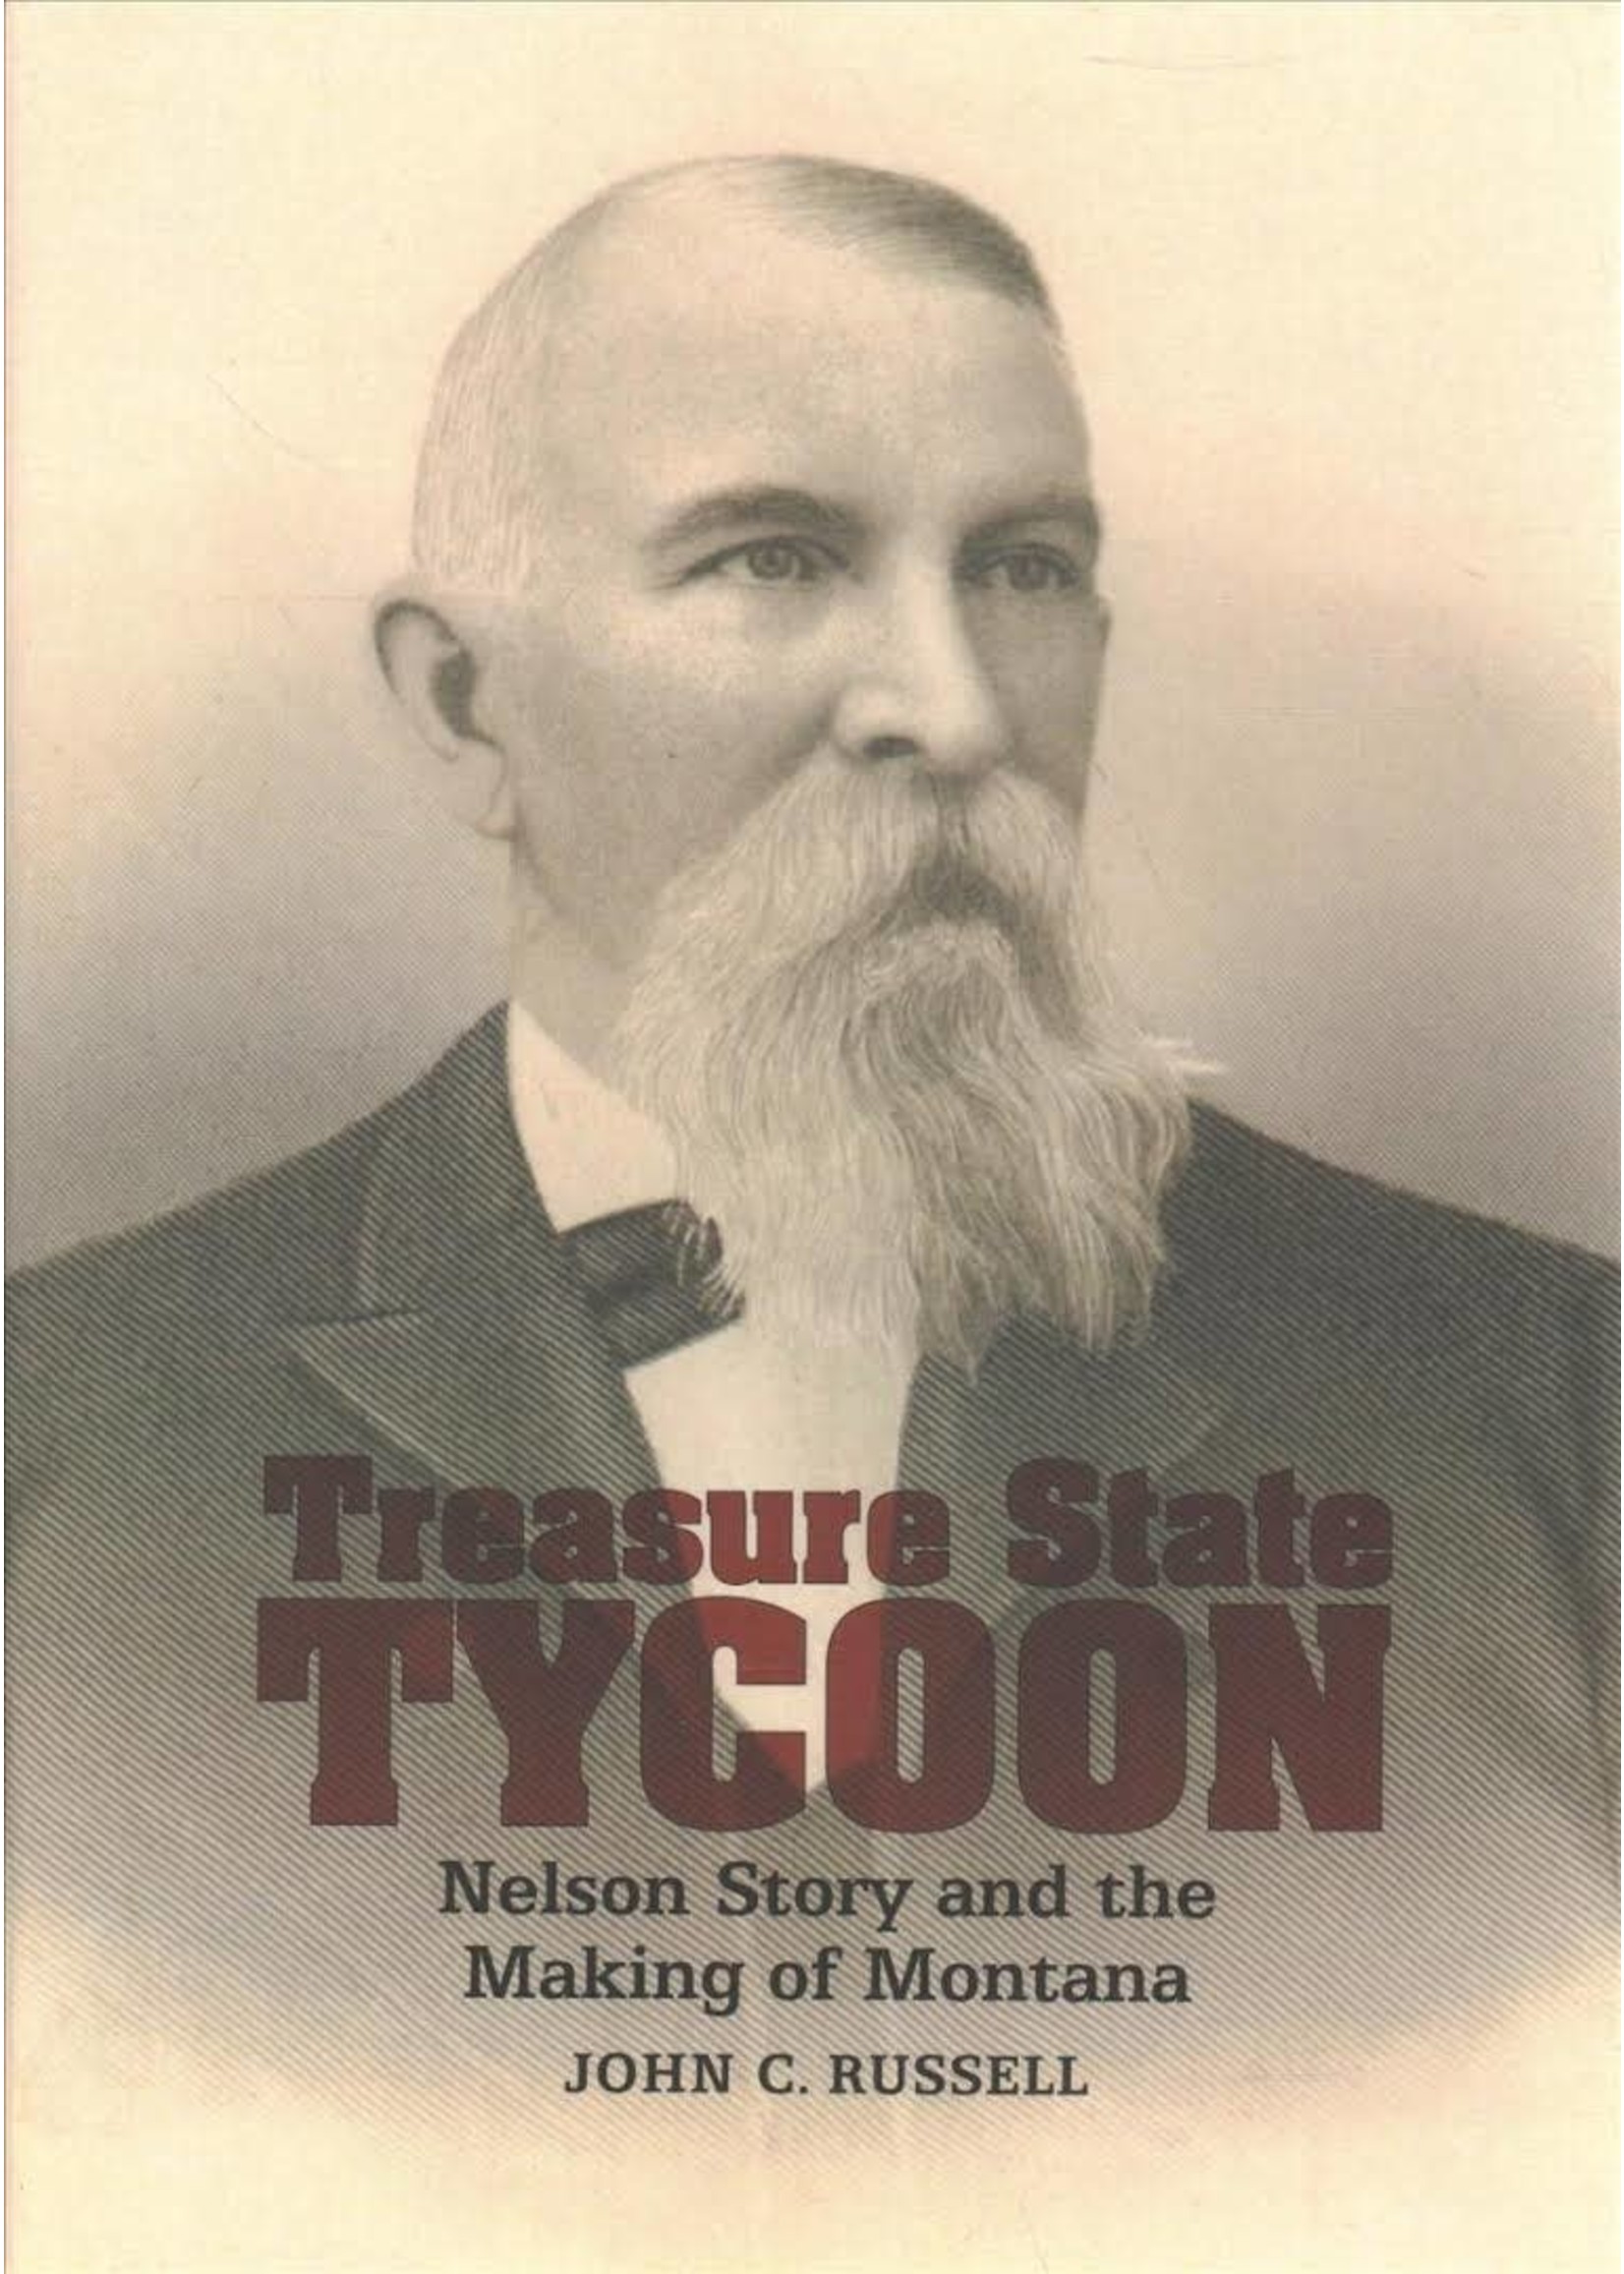 Mt Historical Society Press Treasure State Tycoon